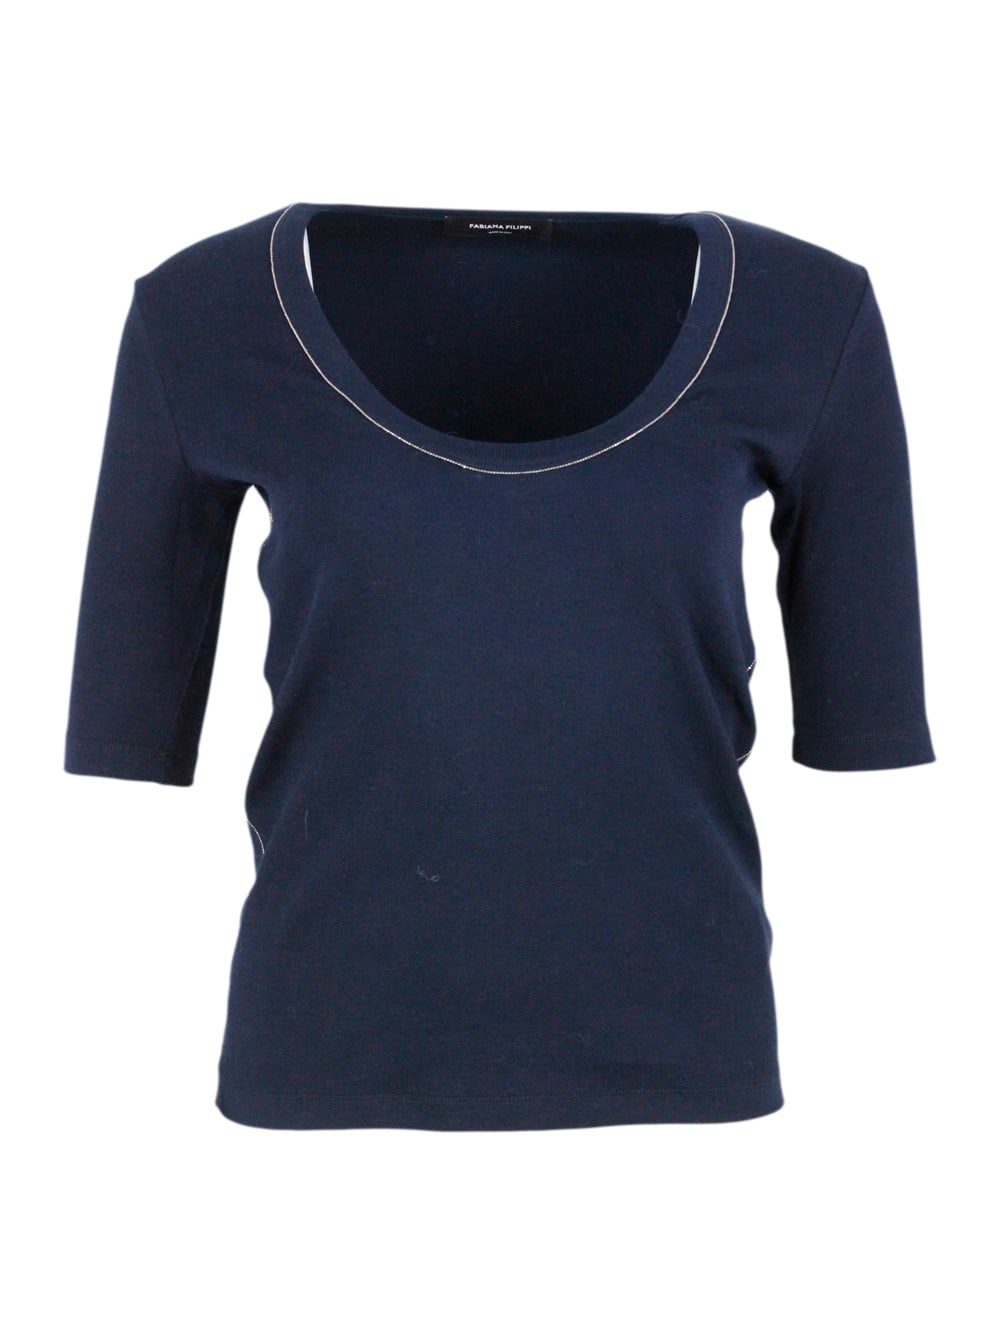 Ribbed Cotton T-shirt With U-neck, Elbow-length Sleeves Embellished With Rows Of Monili On The Neck And Sides